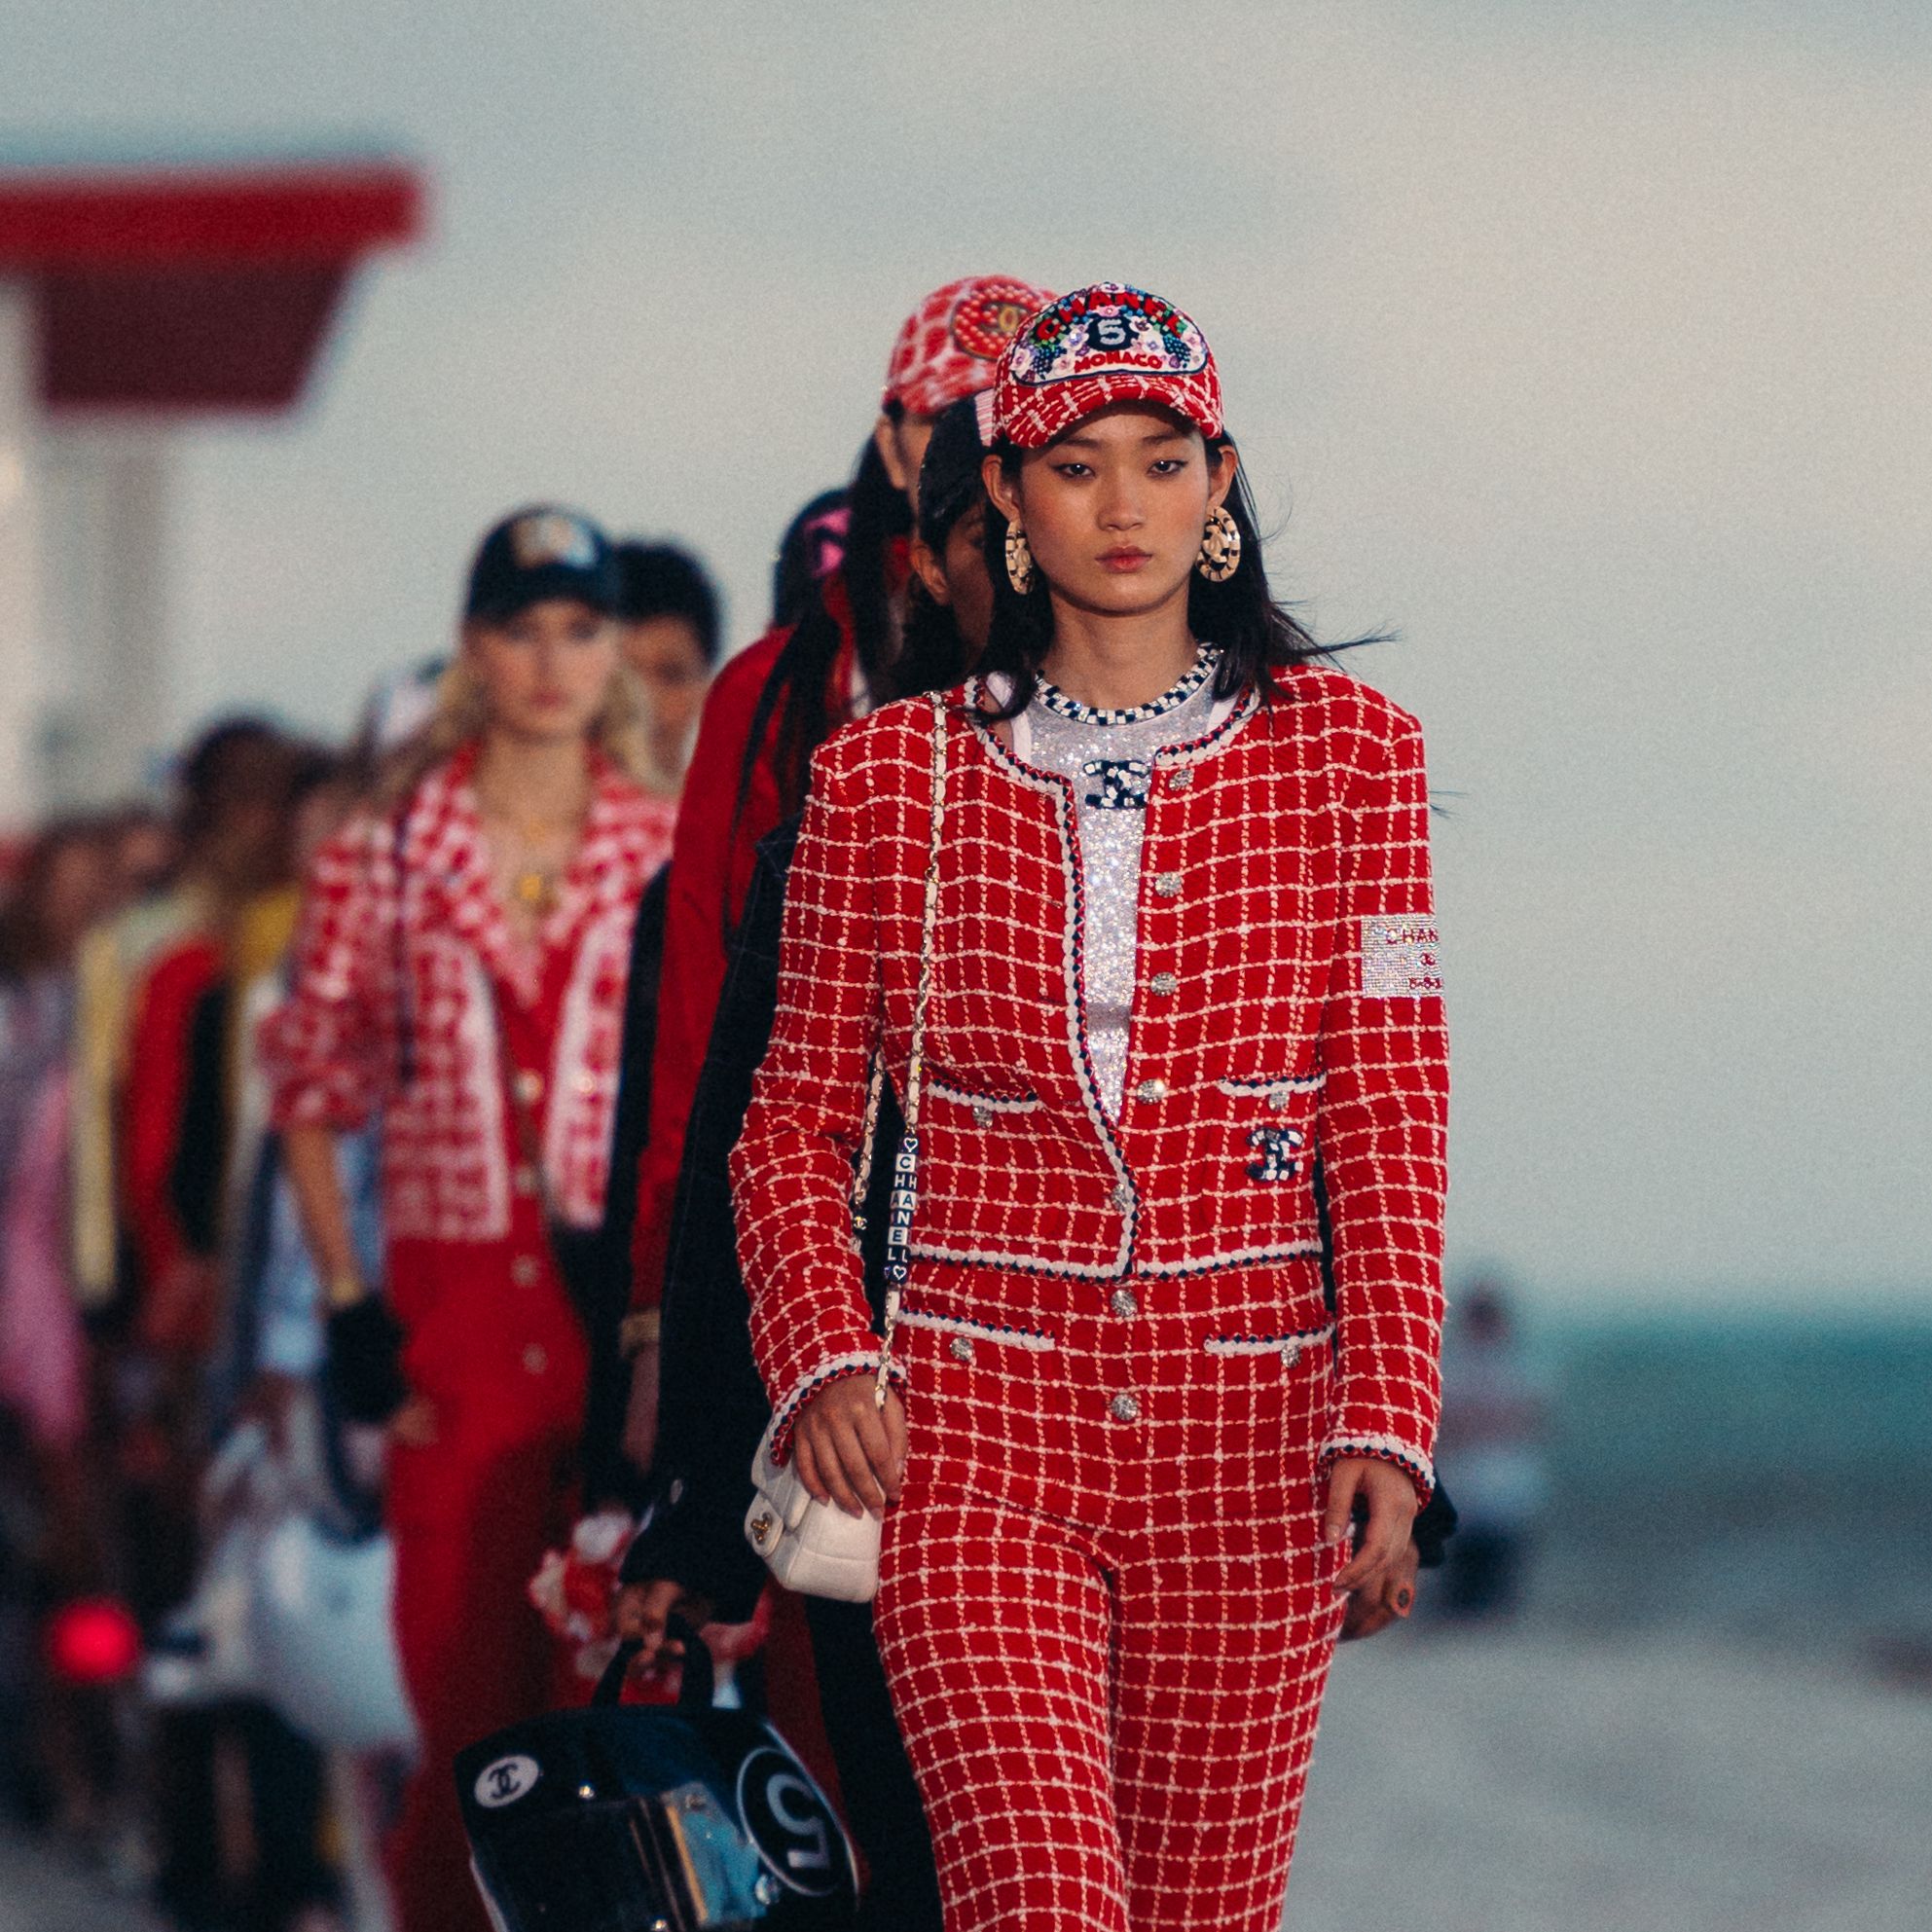  The house brought its cruise collection stateside to the beach at the Faena Hotel.